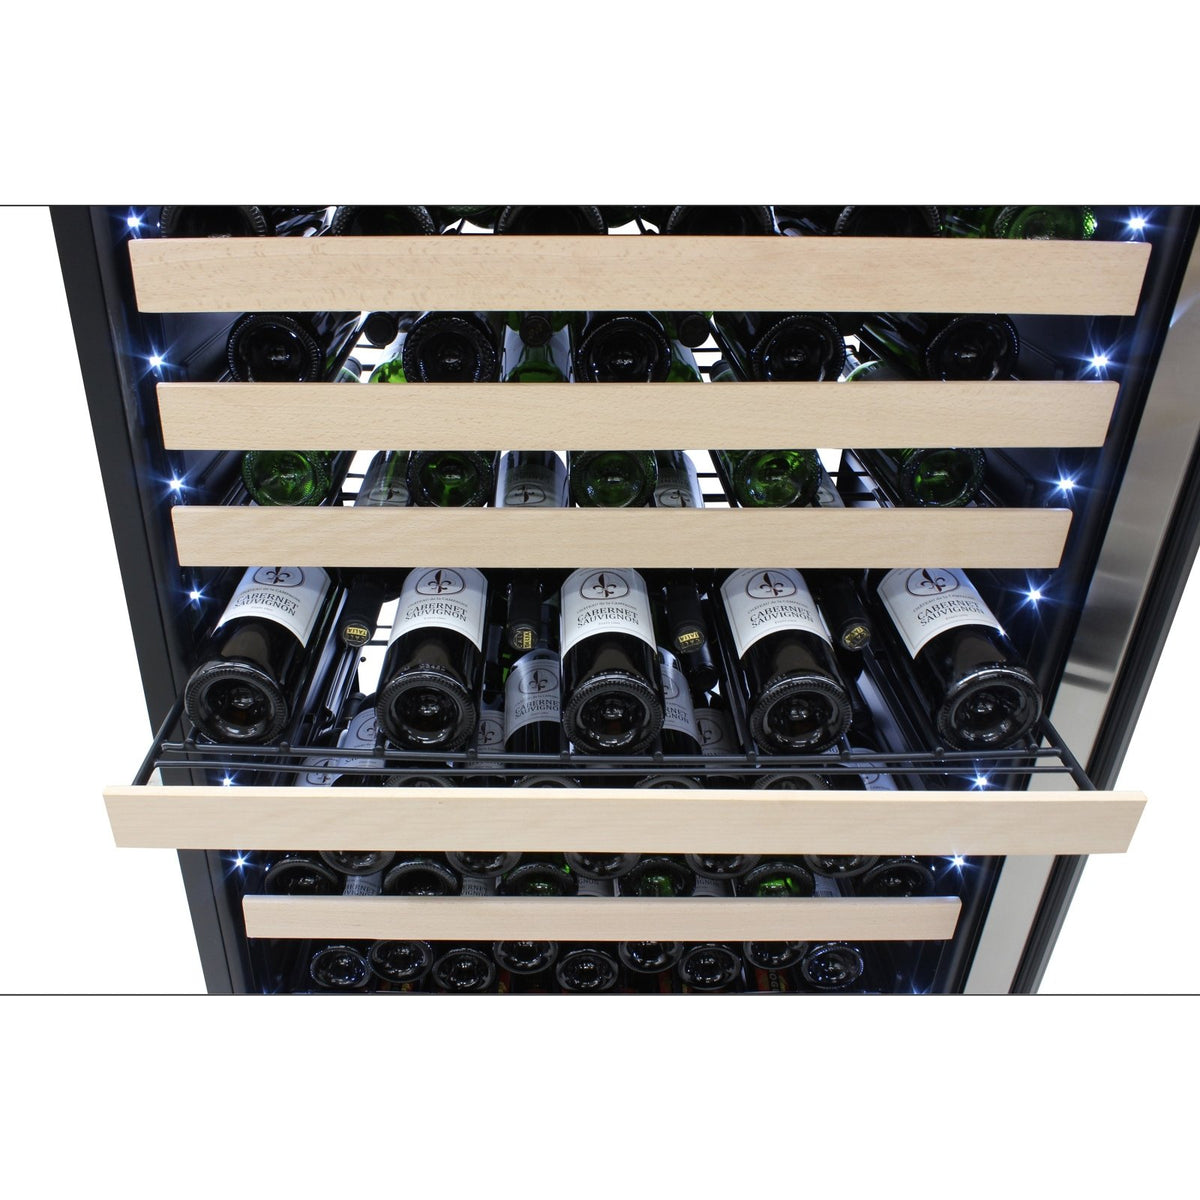 Vinotemp EL - 300DSWL White Backlit Panel Single - Zone Wine Cooler, 173 Bottle Capacity, in Stainless Steel - TheChefStore.Com